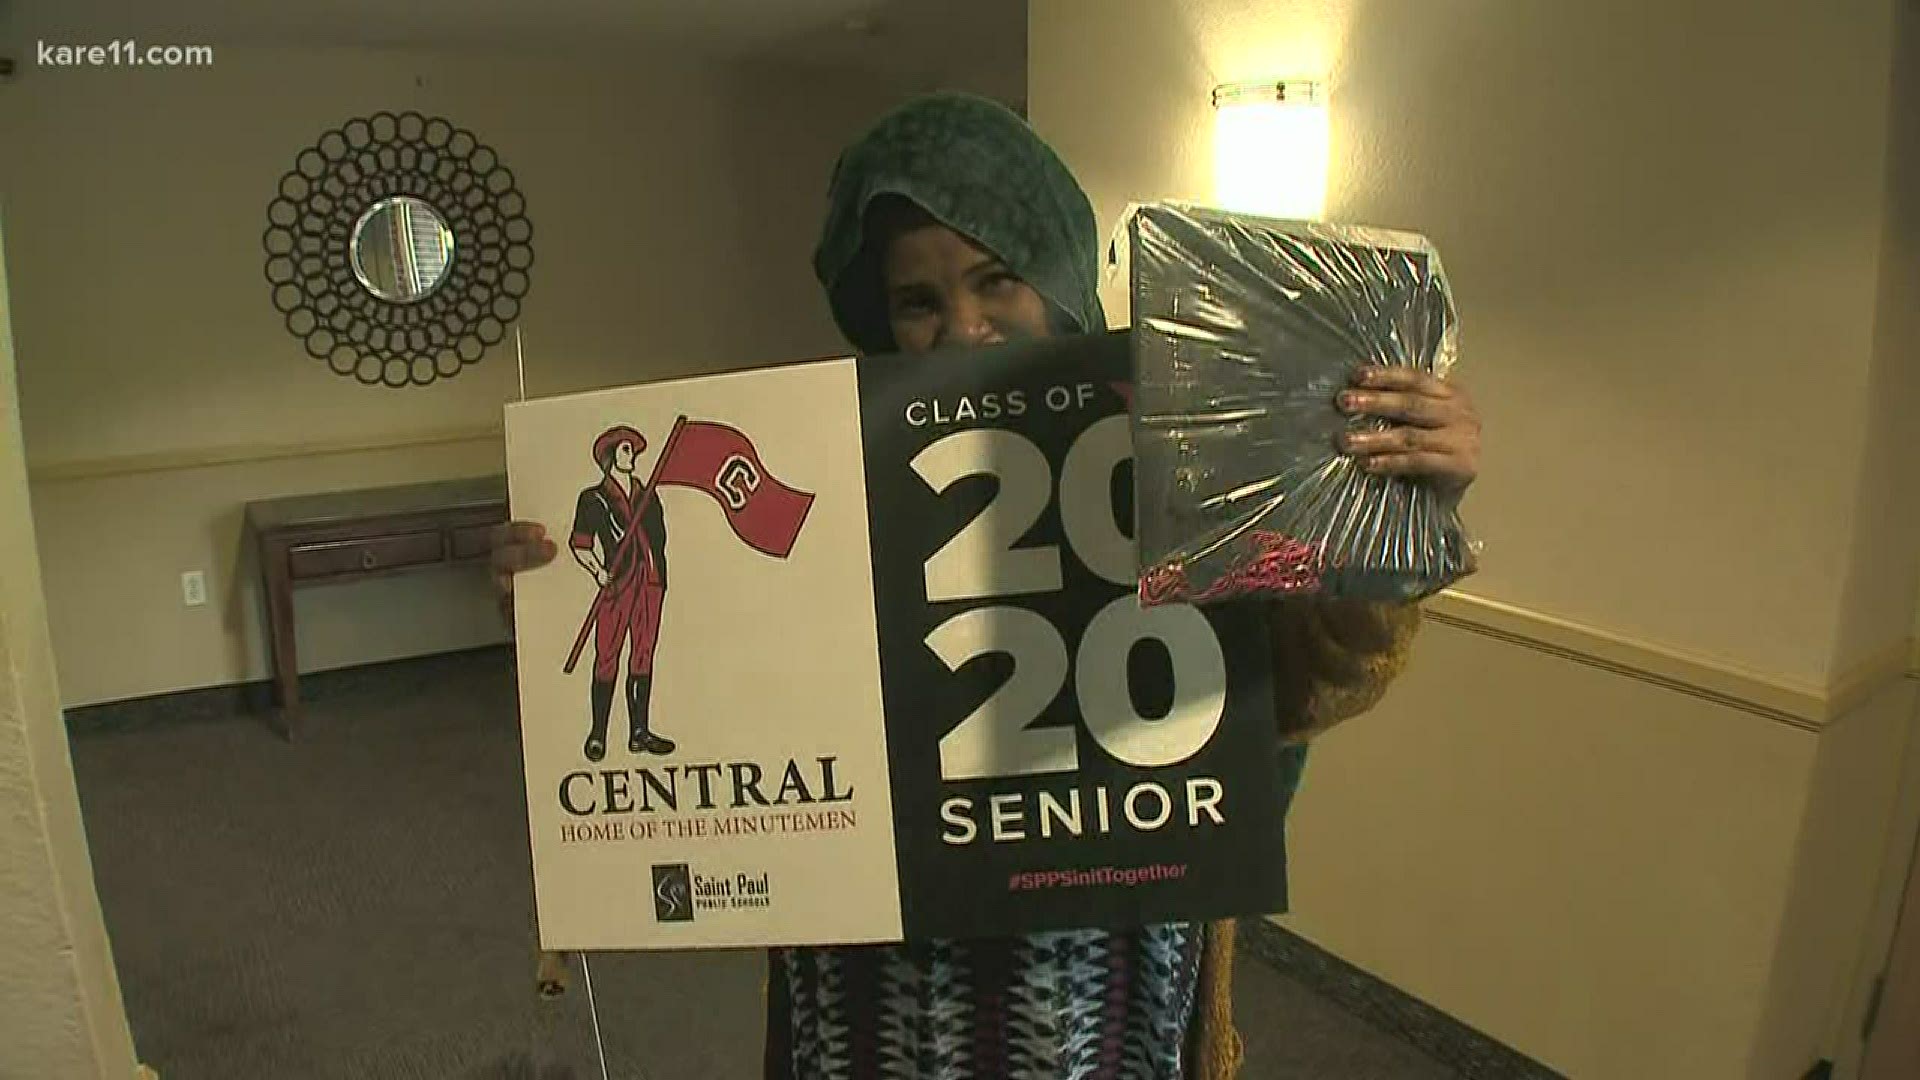 St. Paul school leaders delivered the caps, gowns and yard signs ahead of this year's virtual graduation ceremonies.